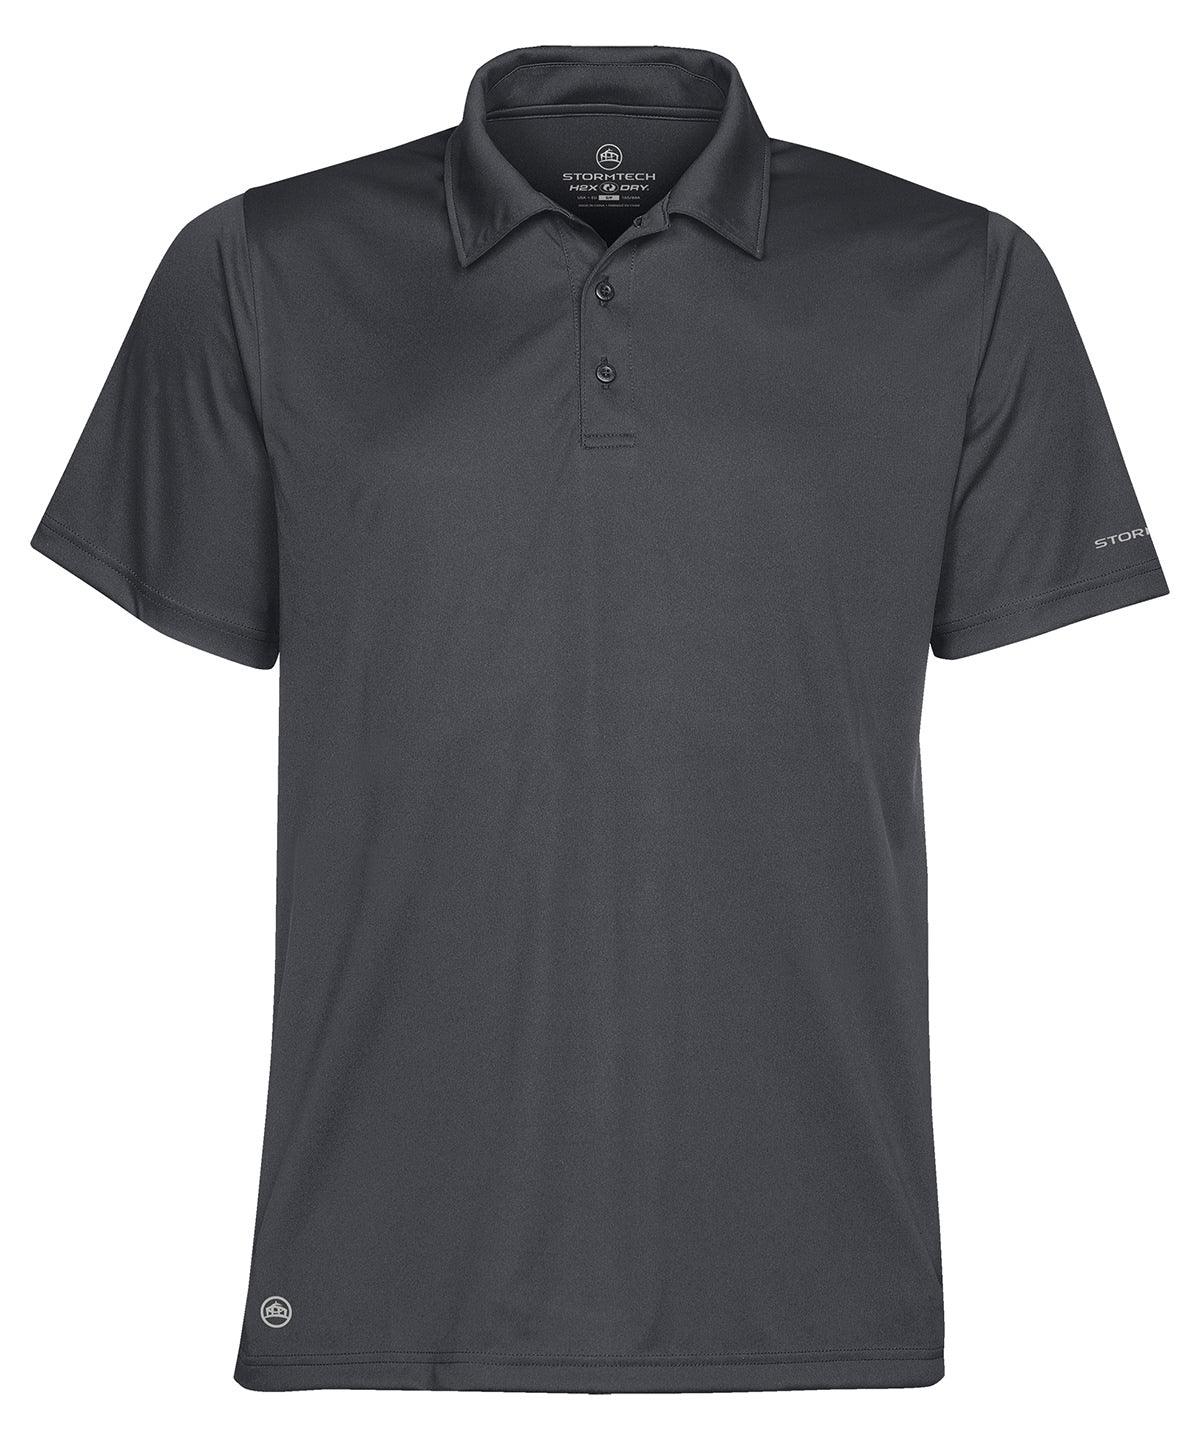 Graphite - Sports performance polo Polos Stormtech Activewear & Performance, Must Haves, Polos & Casual Schoolwear Centres